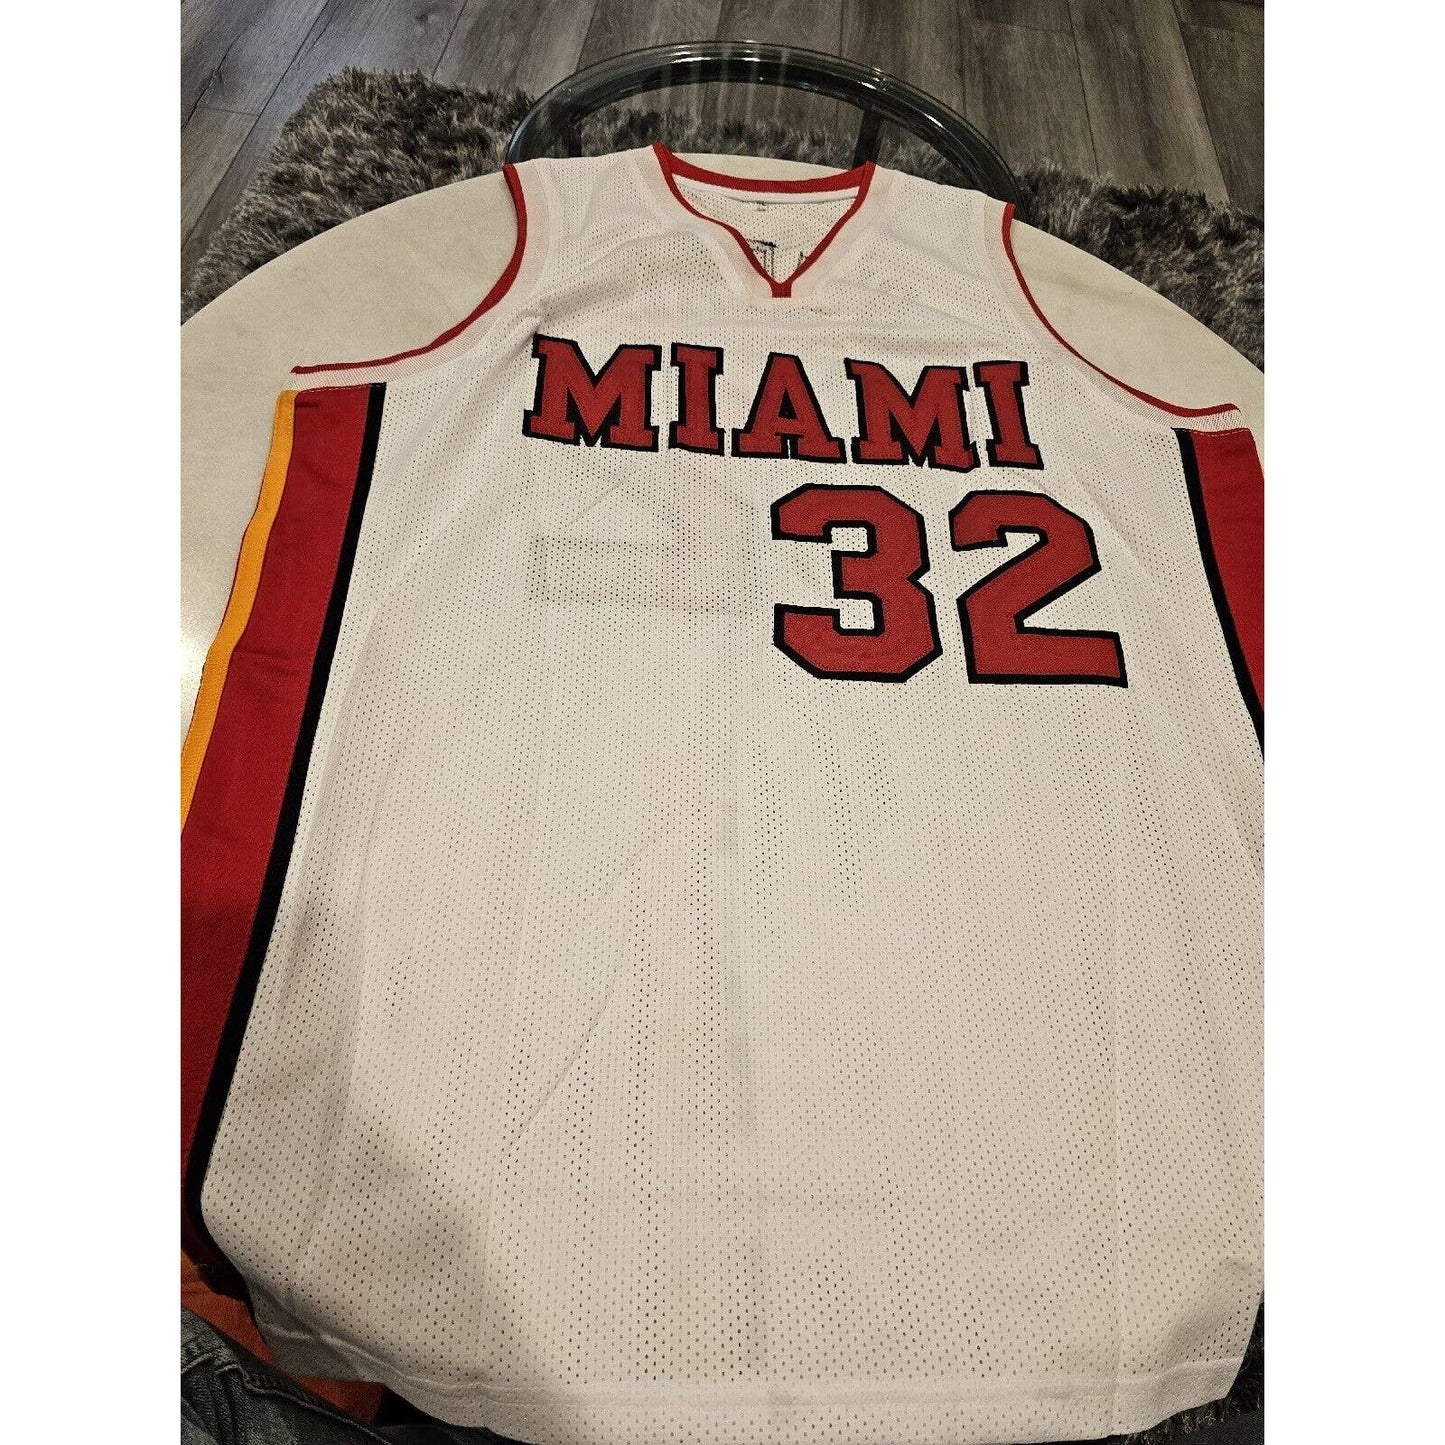 Shaquille O’Neal Autographed/Signed Jersey Beckett Miami Heat Shaq